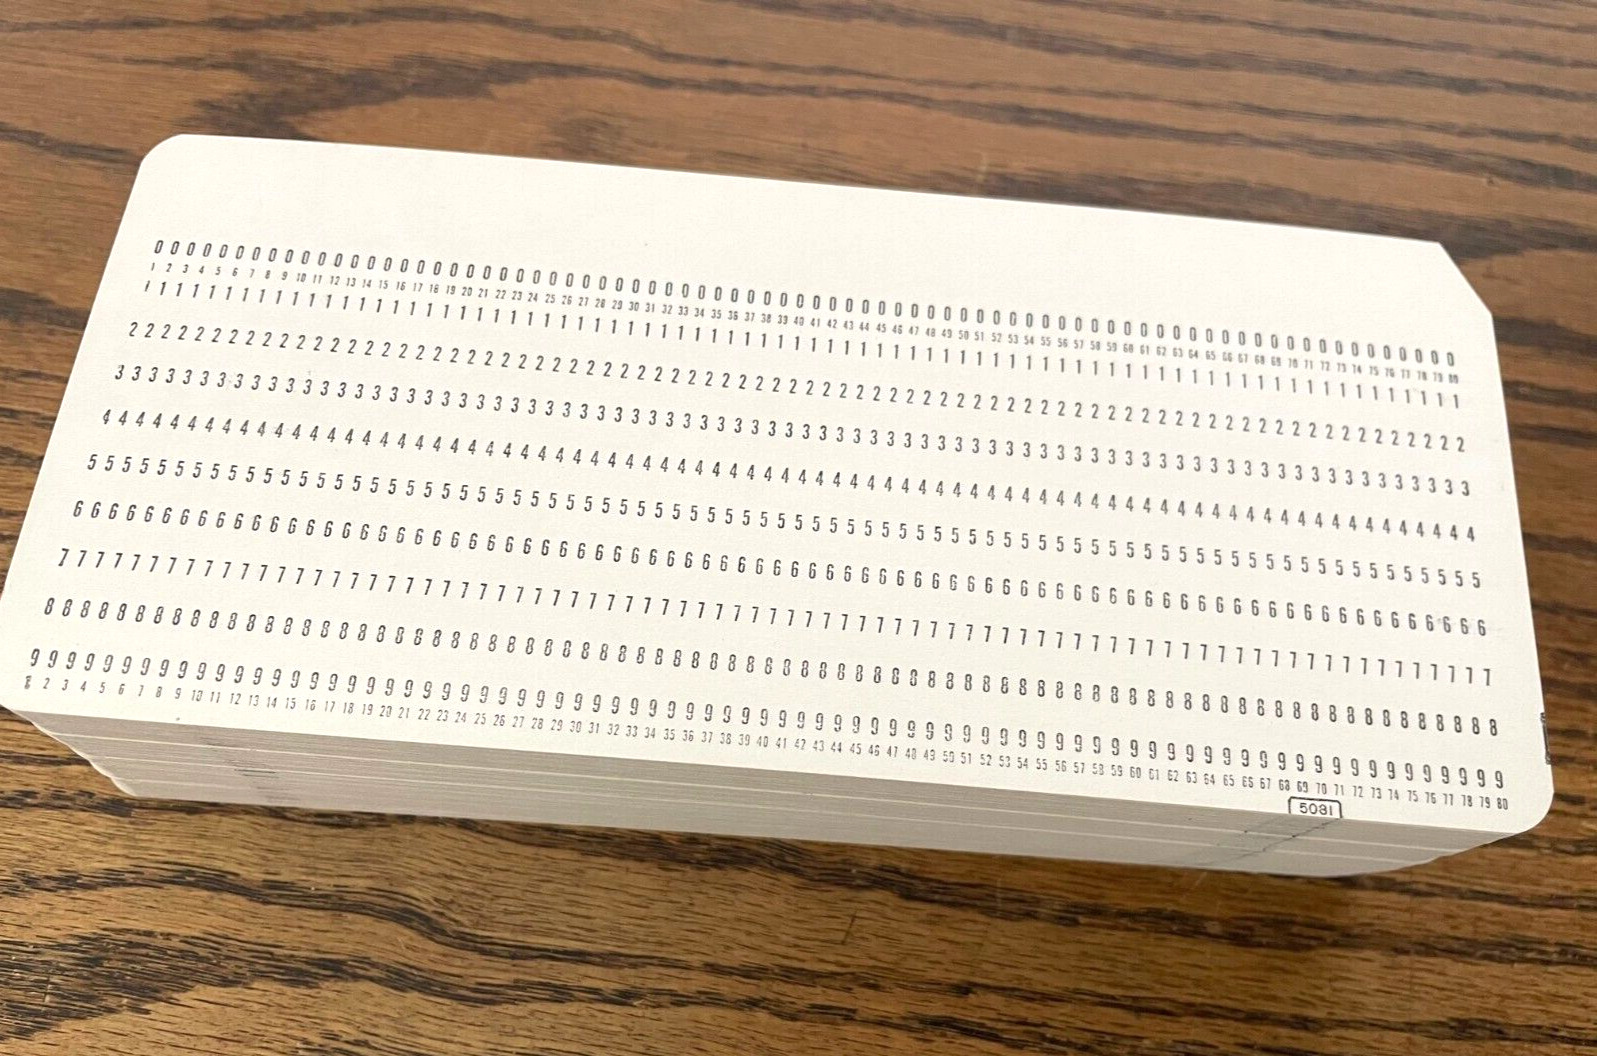 200 Vintage Computer IBM 5081 Data Processing Punch Cards - Ships the Same Day